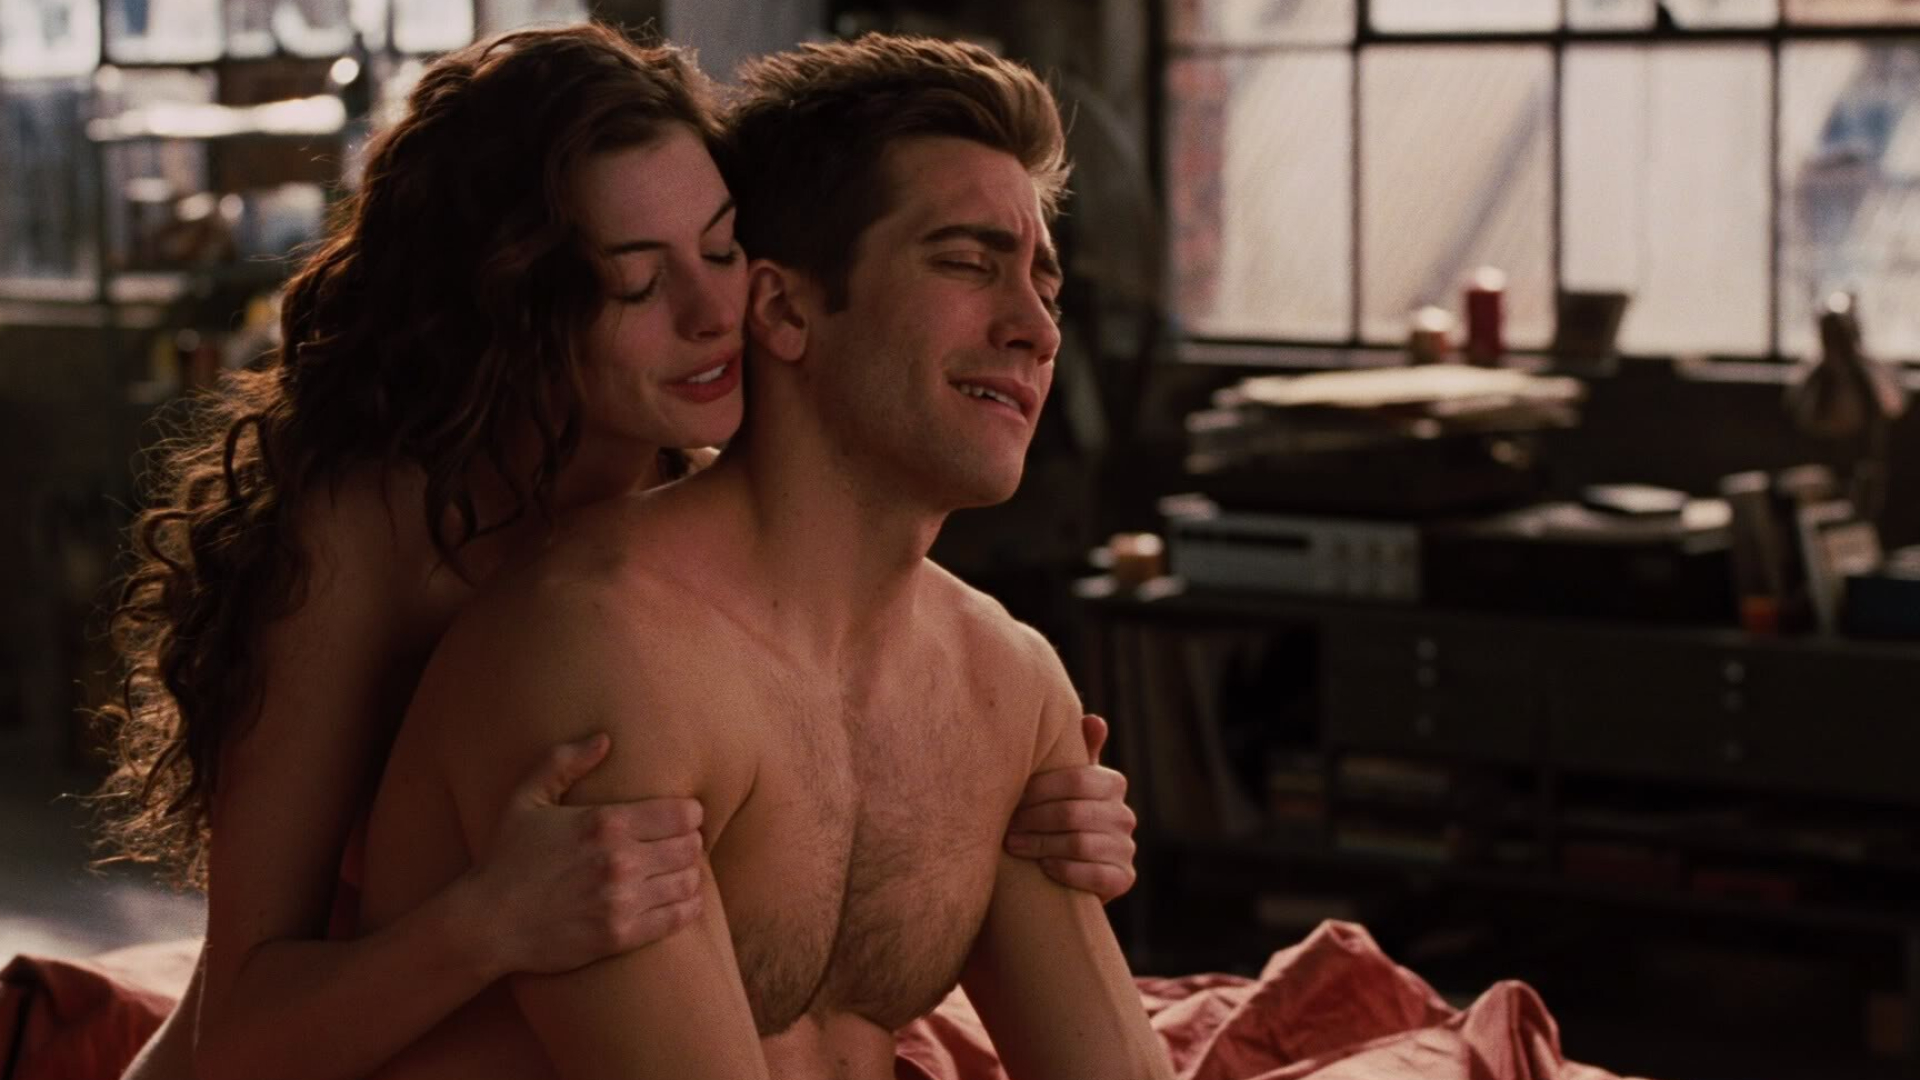 Love and Other Drugs: Jamie and Maggie, Jake Gyllenhaal, Anne Hathaway, A film directed by Edward Zwick. 1920x1080 Full HD Background.